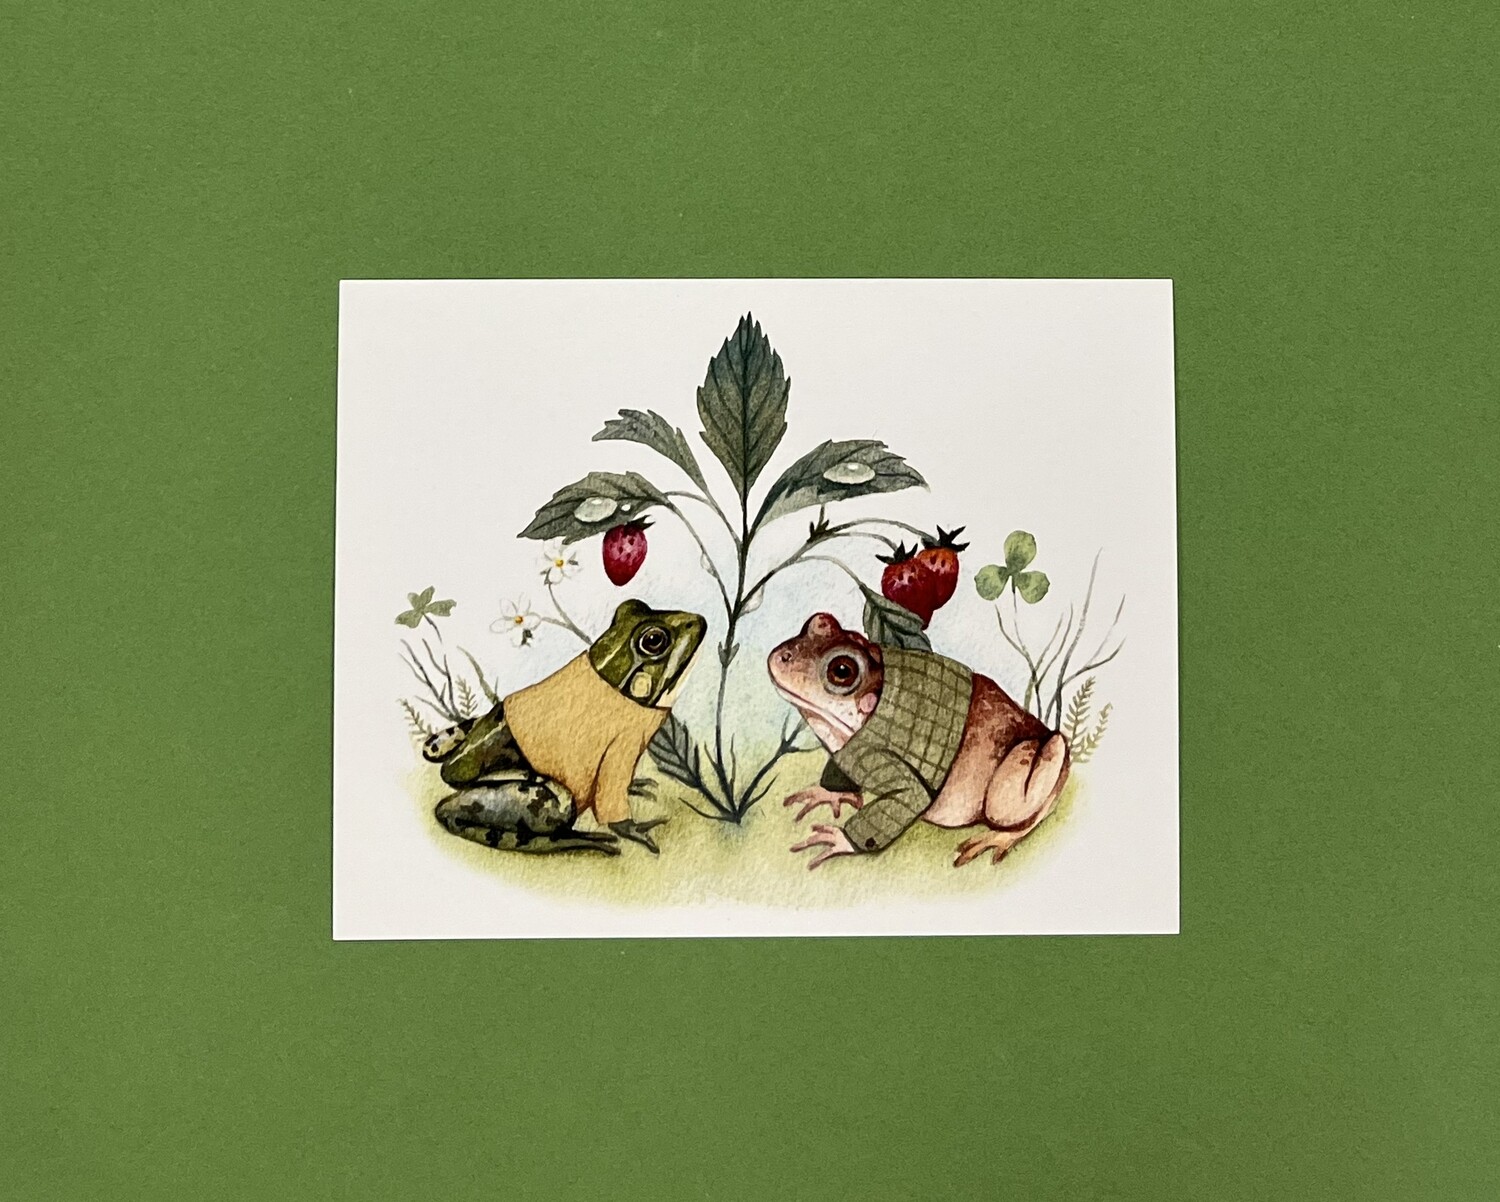 Frog and Toad - Postcard by Valerie Niemeyer